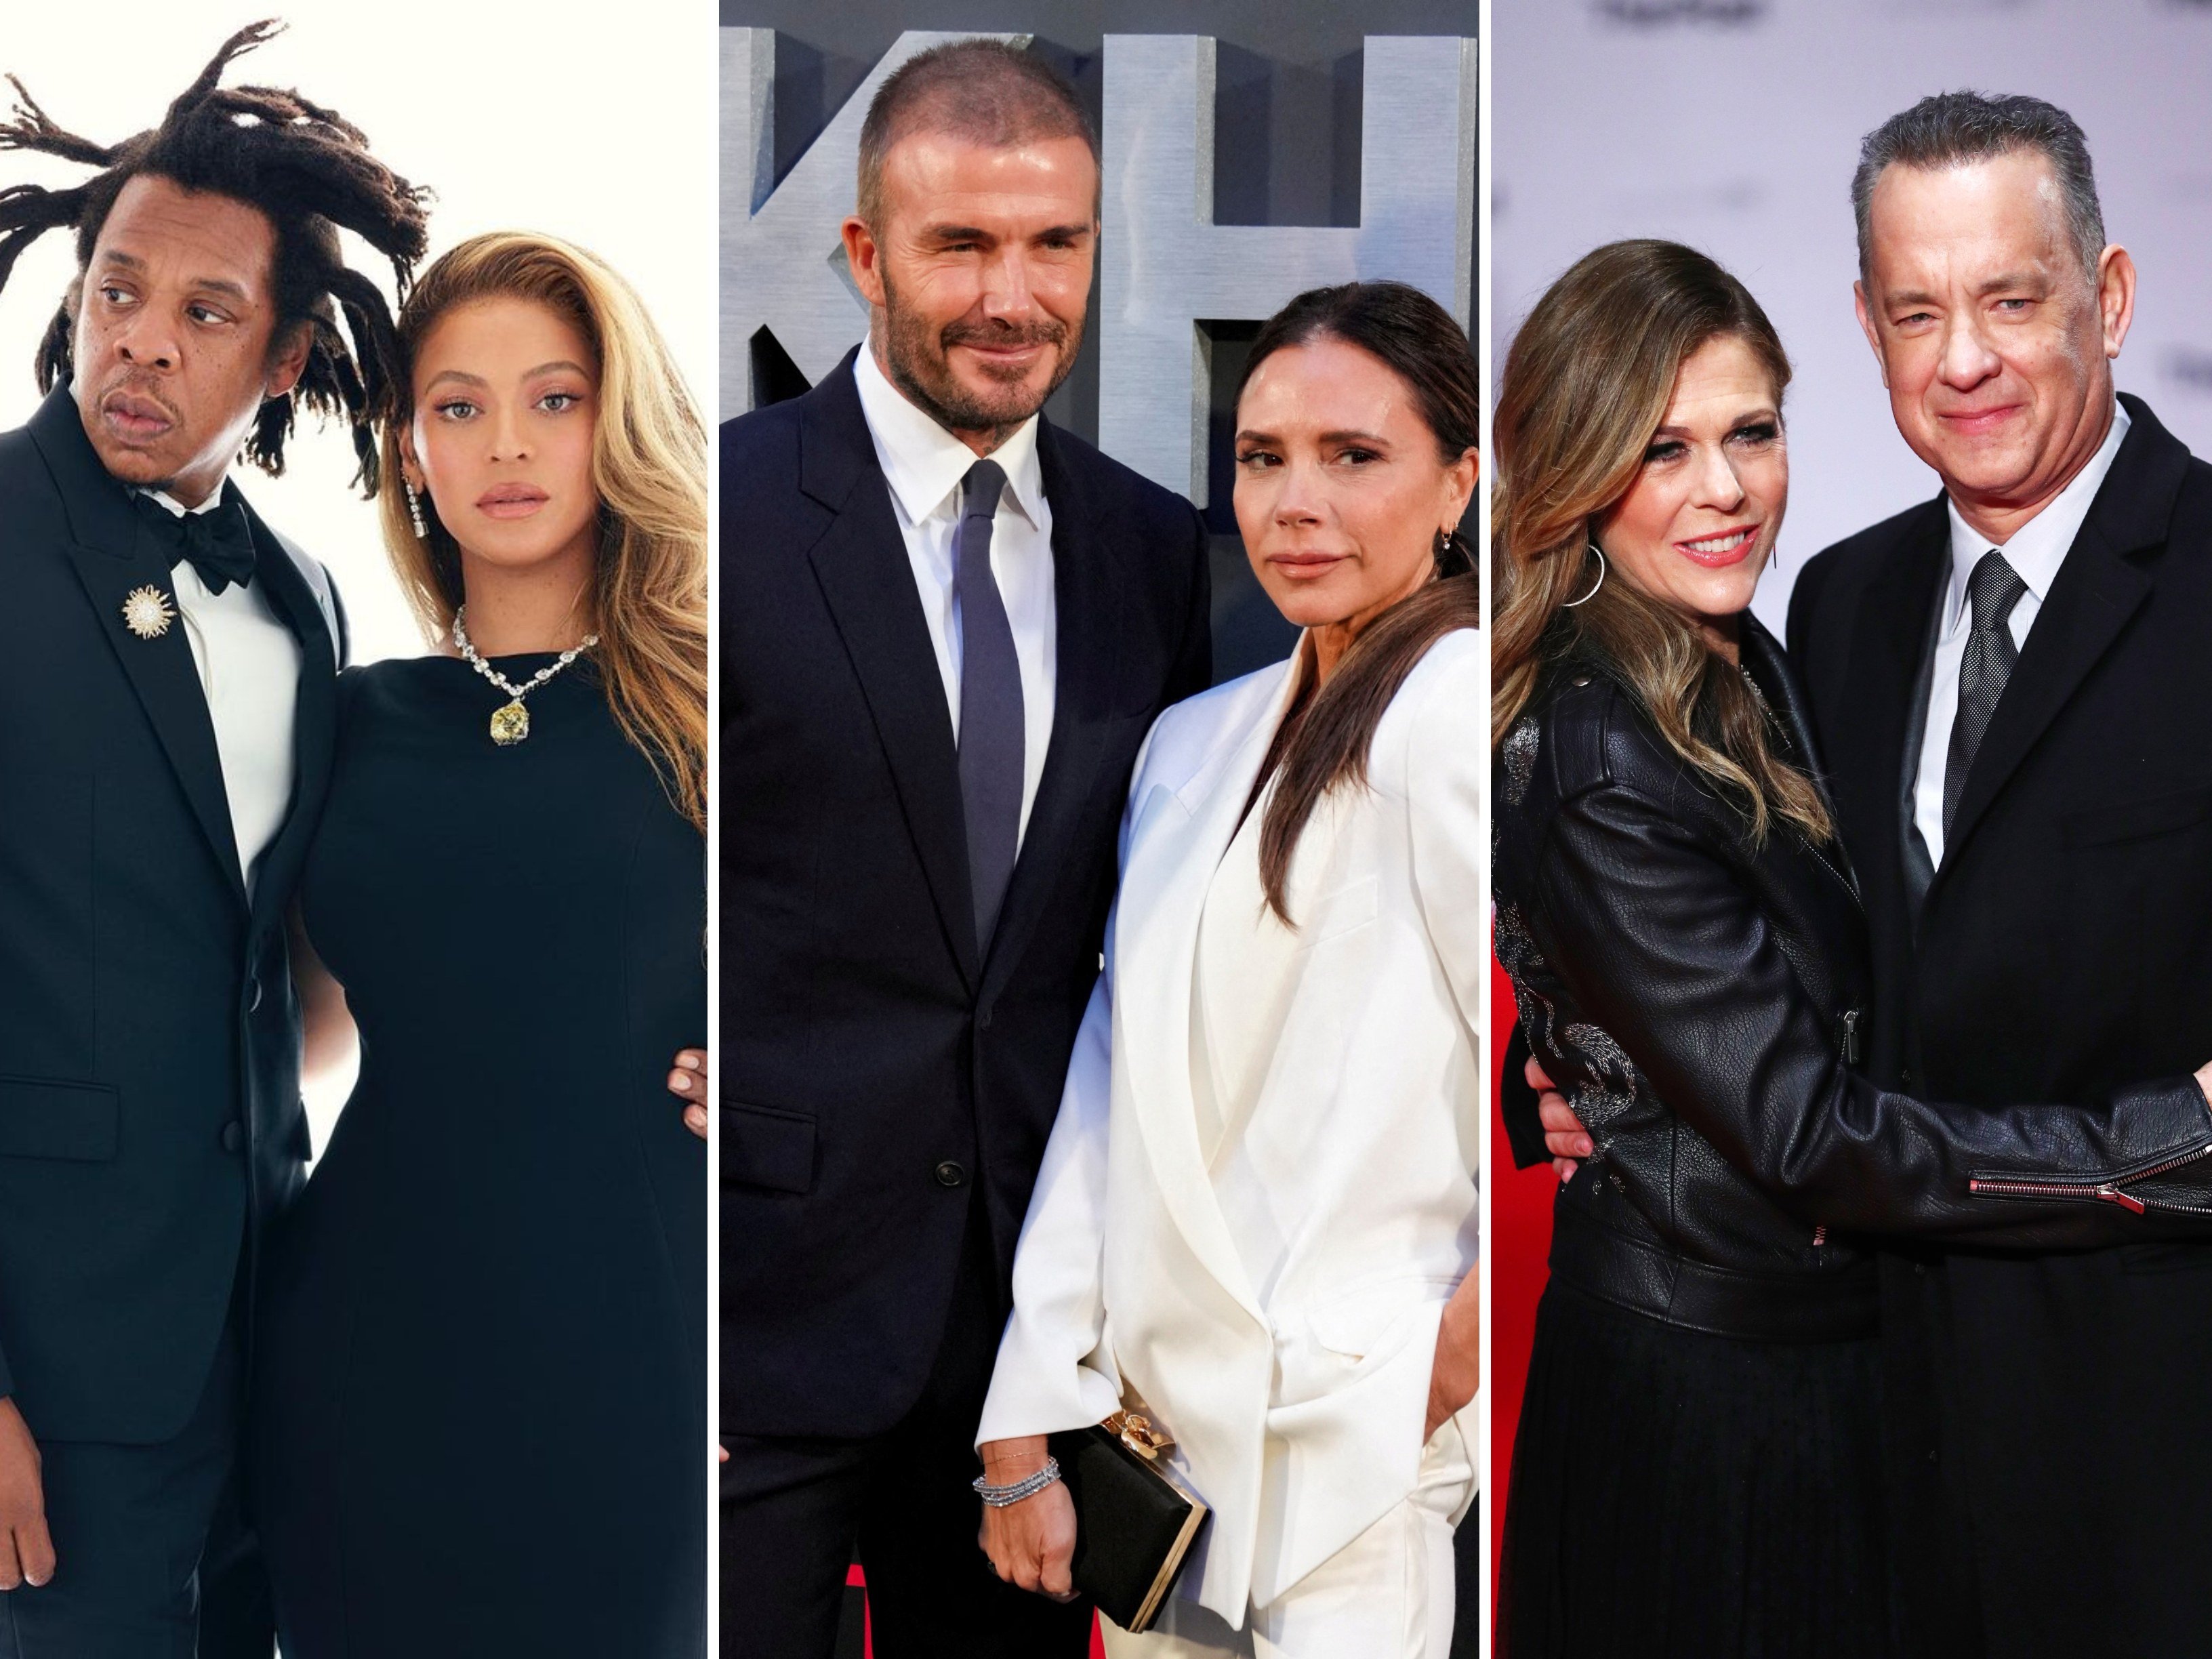 Celebrity love that has endured (from left): Jay-Z and Beyoncé, David and Victoria Beckham, and Rita Wilson and Tom Hanks. Photos: @beyonce/Instagram, Reuters, EPA